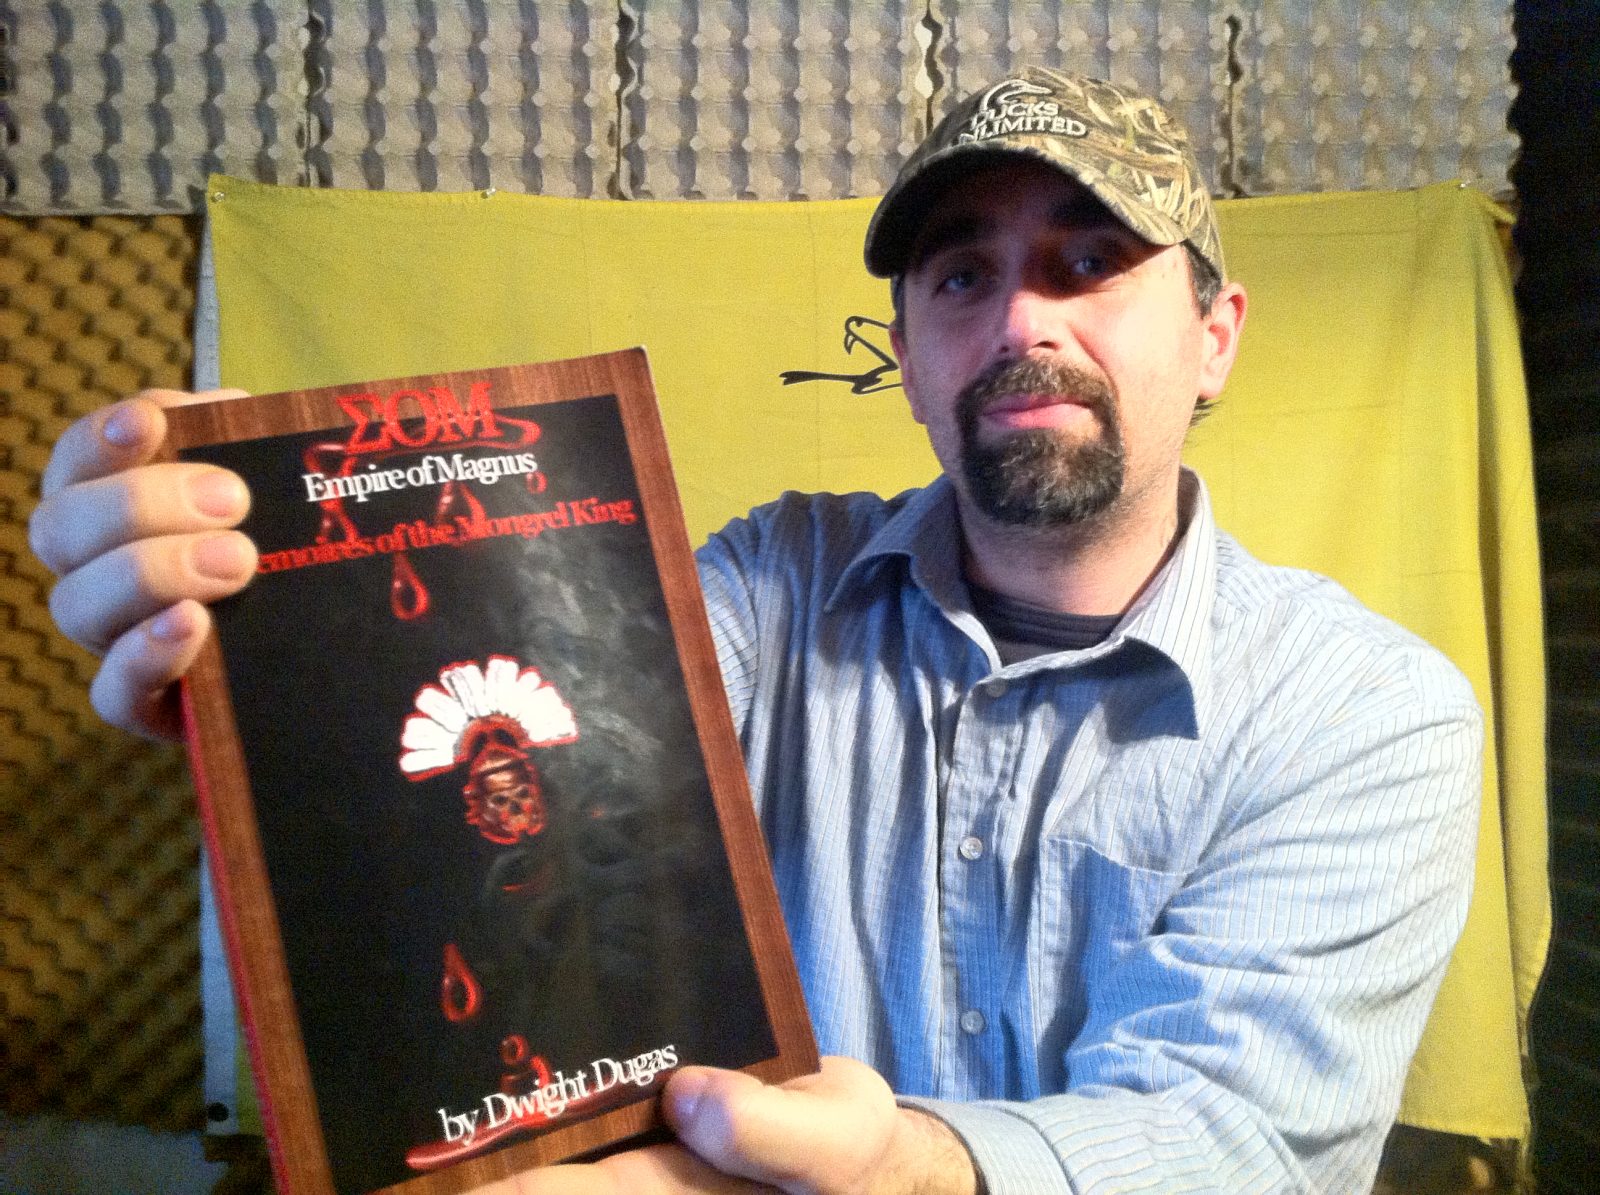 Cornwall author’s first book gets back to basics for horror genre